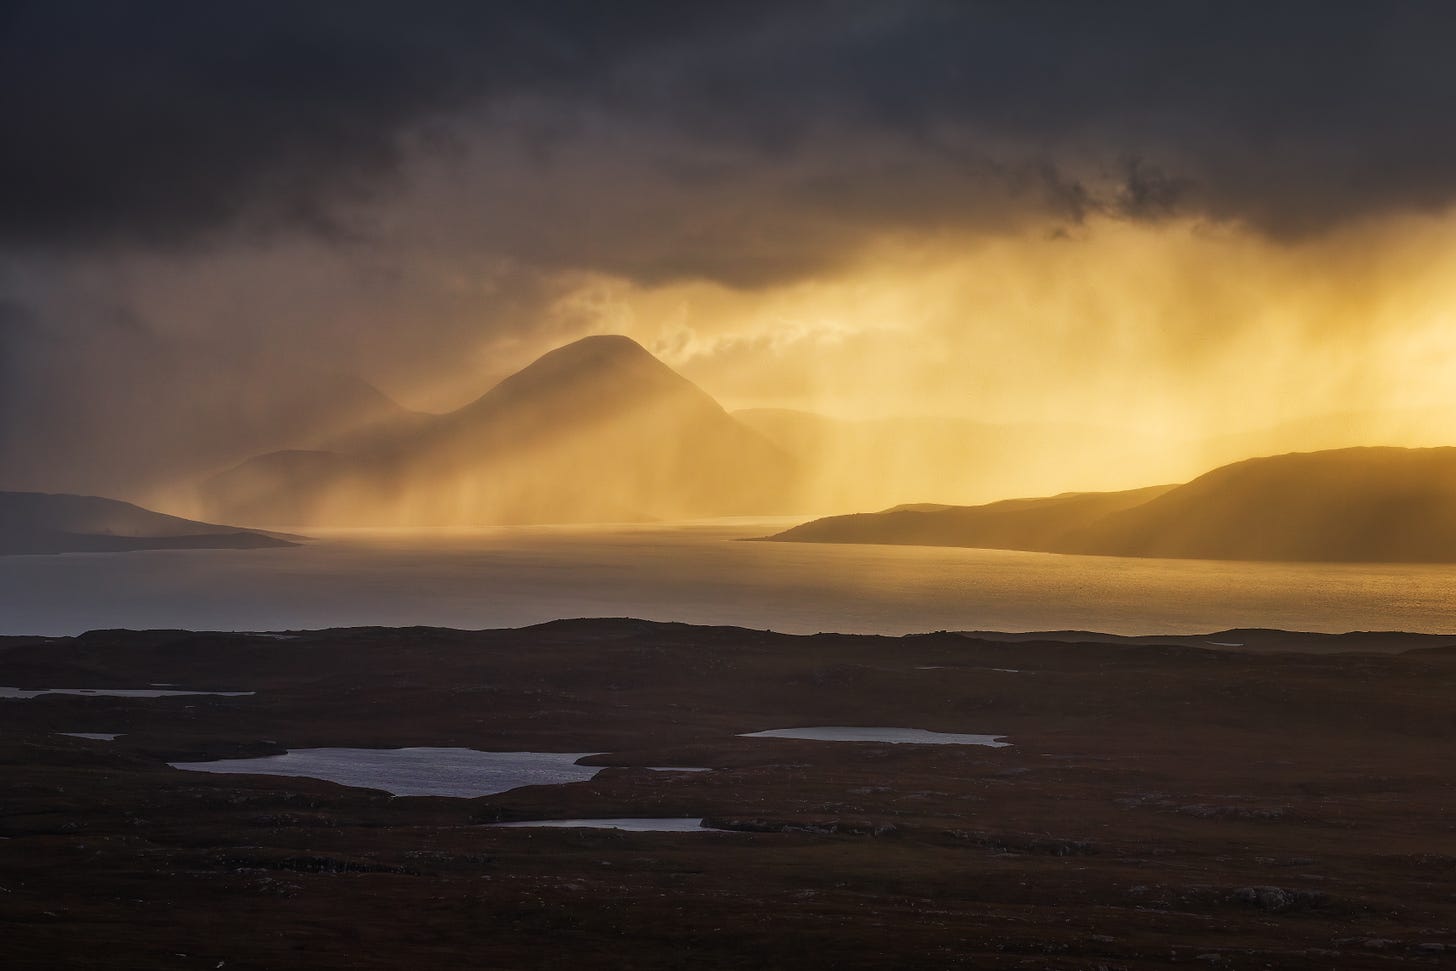 Rain is illuminated by the setting sun revealing the silhouettes of distant mountains